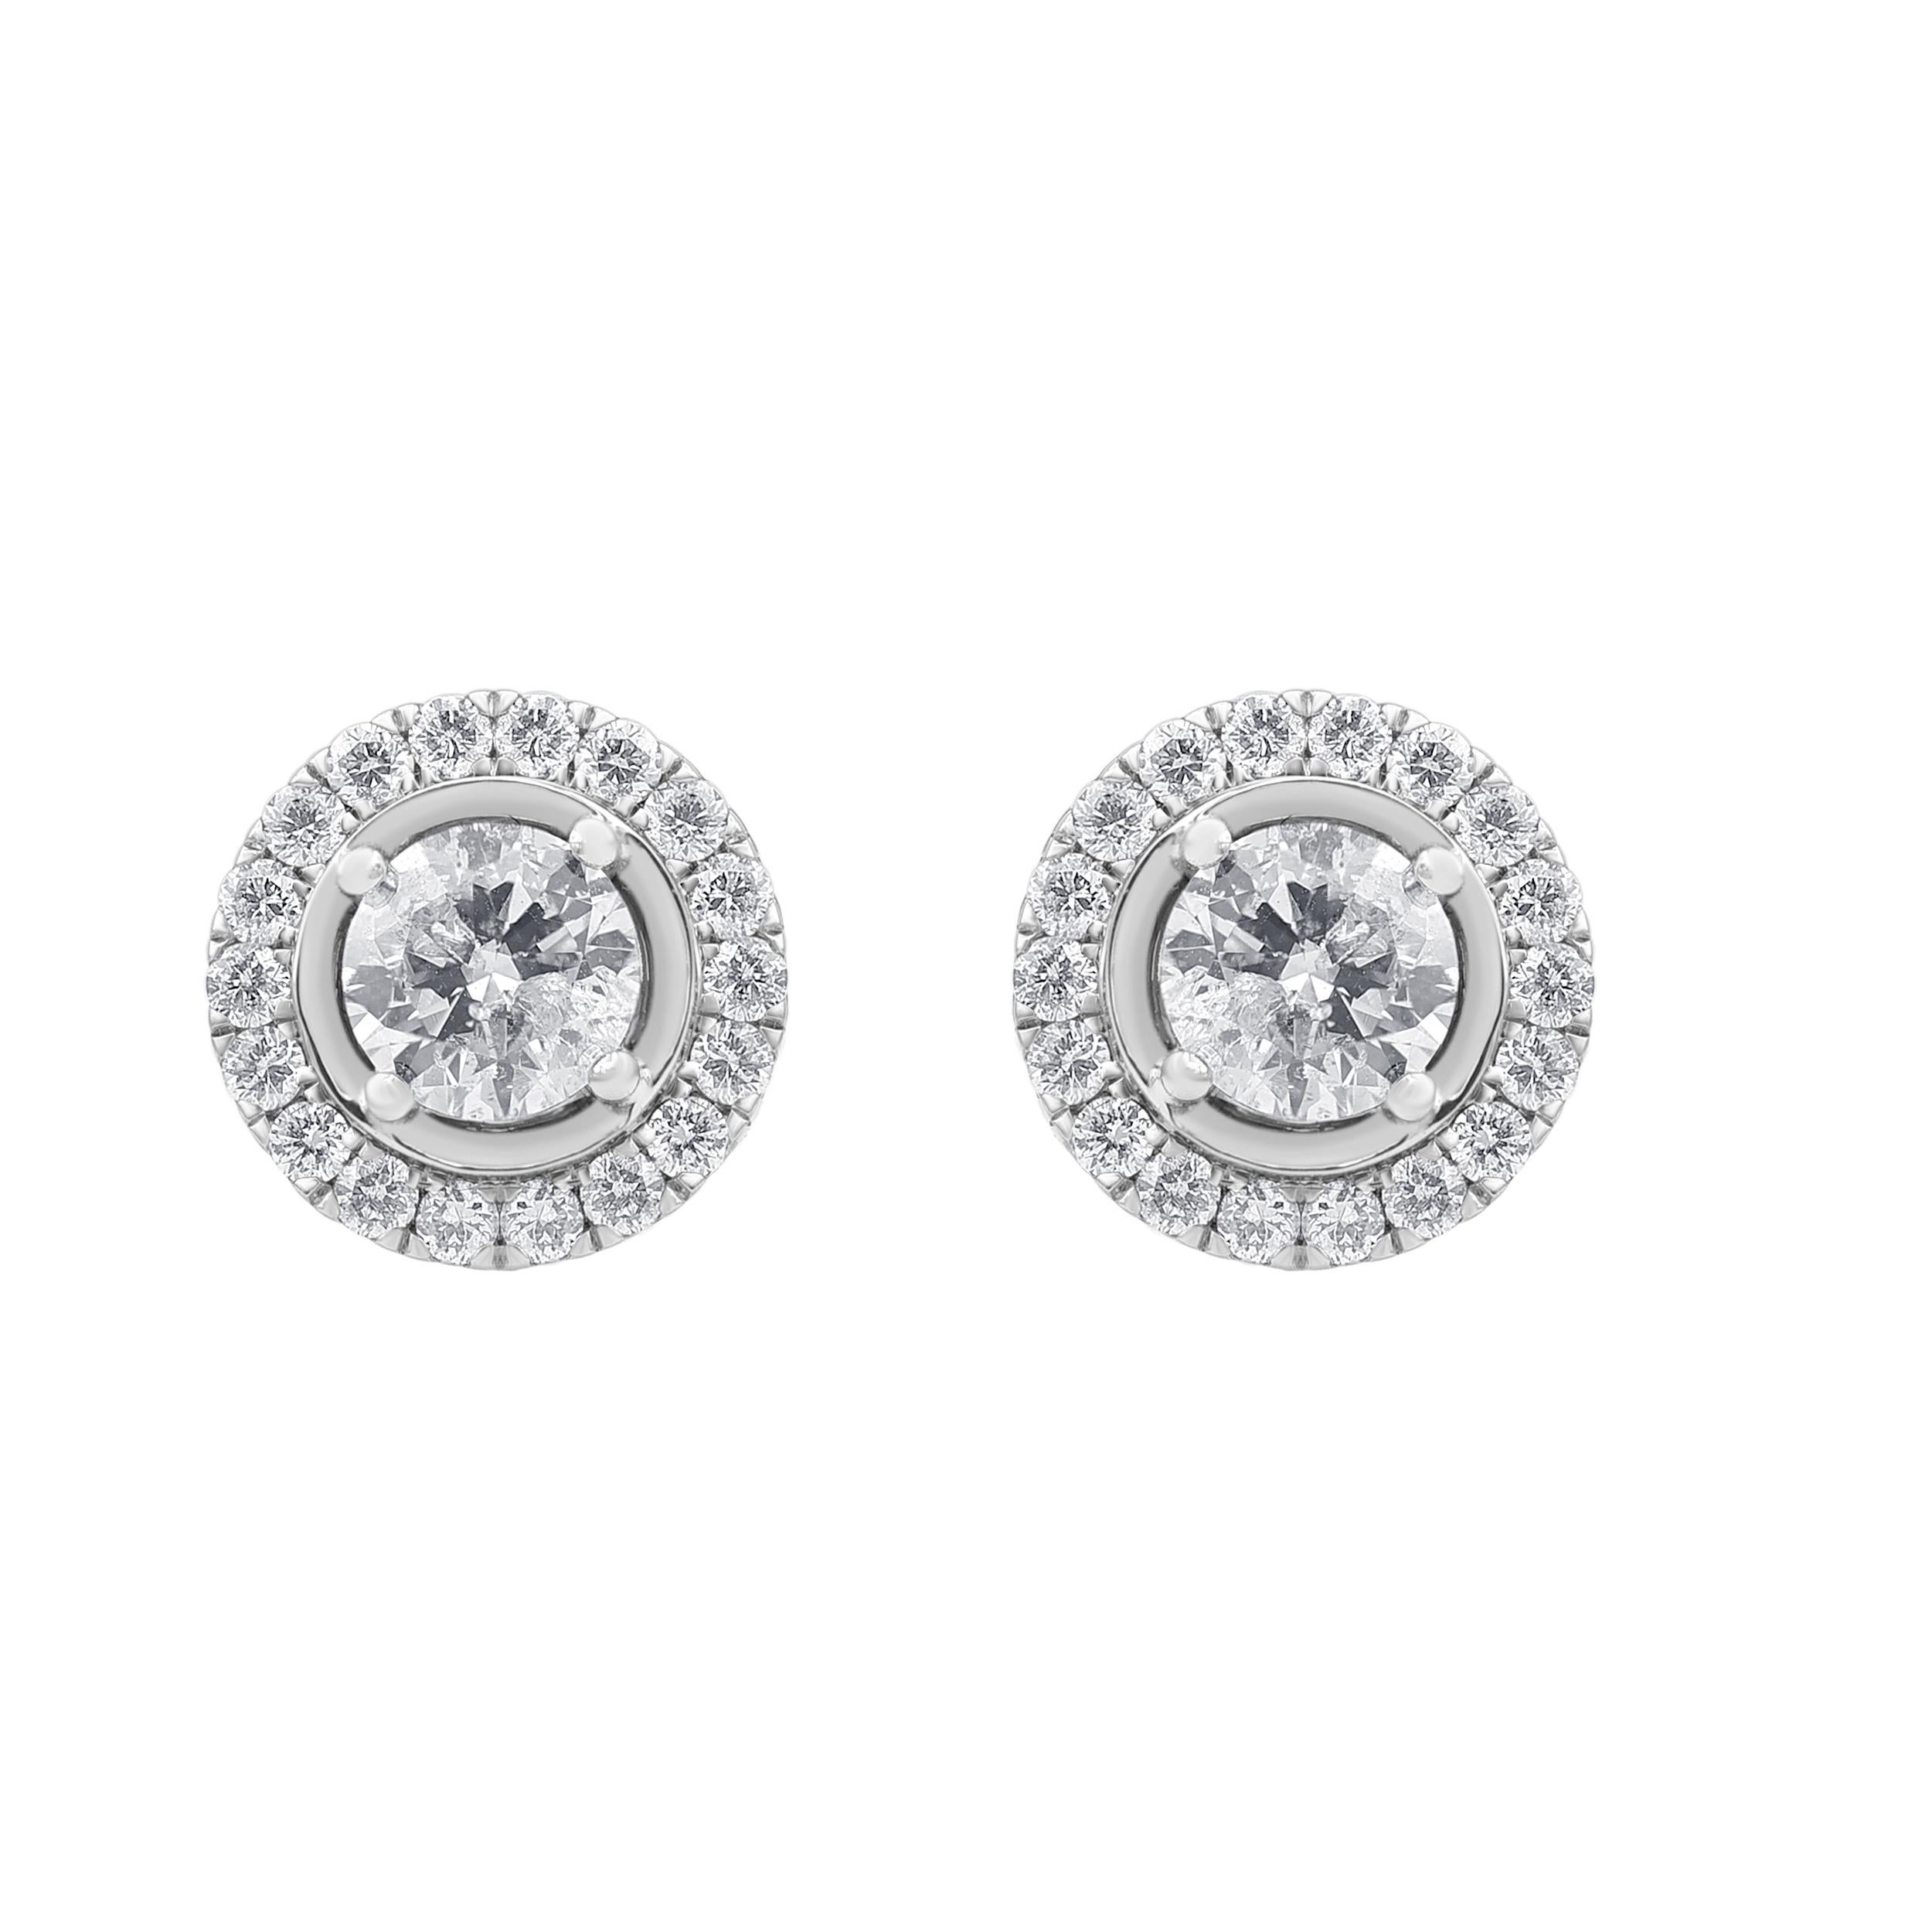 These sparkling Composite diamond stud earrings are designed to dazzle. Crafted in 14K white gold, each earring showcases a 3/4 ct. diamond wrapped in a frame of petite diamonds. Captivating with 2 cts of diamonds and a brilliant buffed luster with